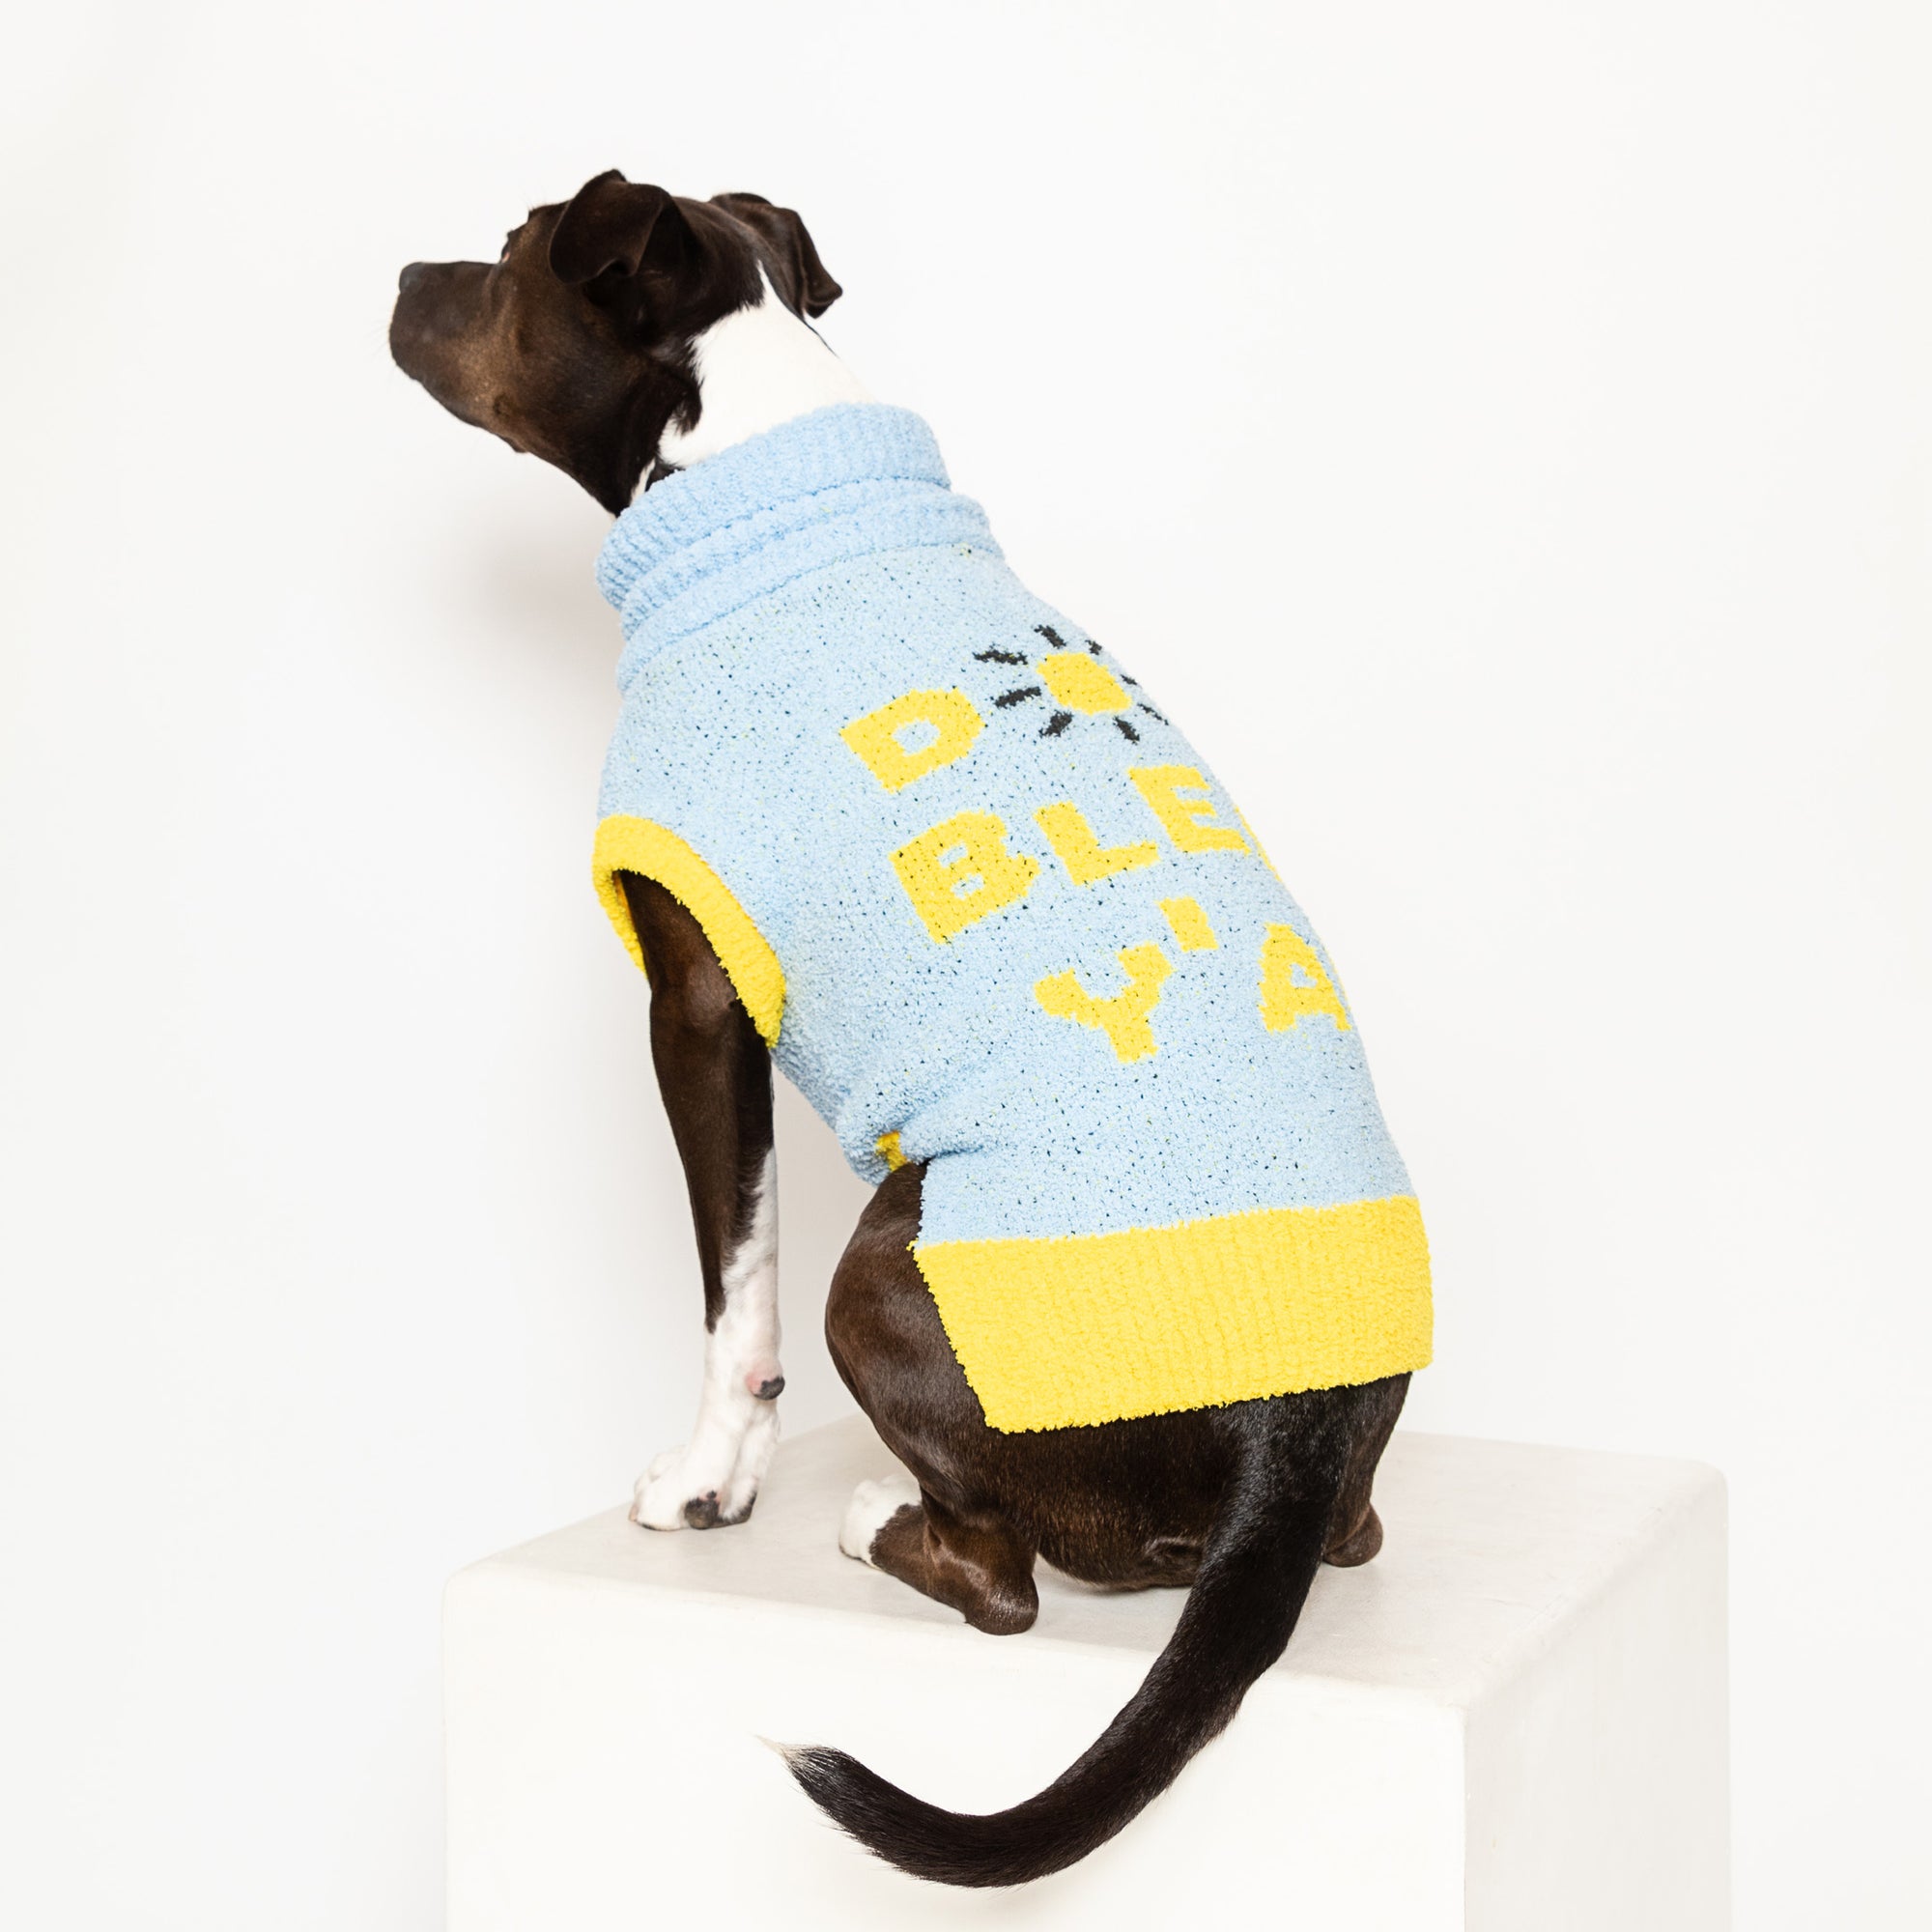 Black dog in a light blue "The Furryfolks" sweater looks away atop a pedestal, with a clean white background.